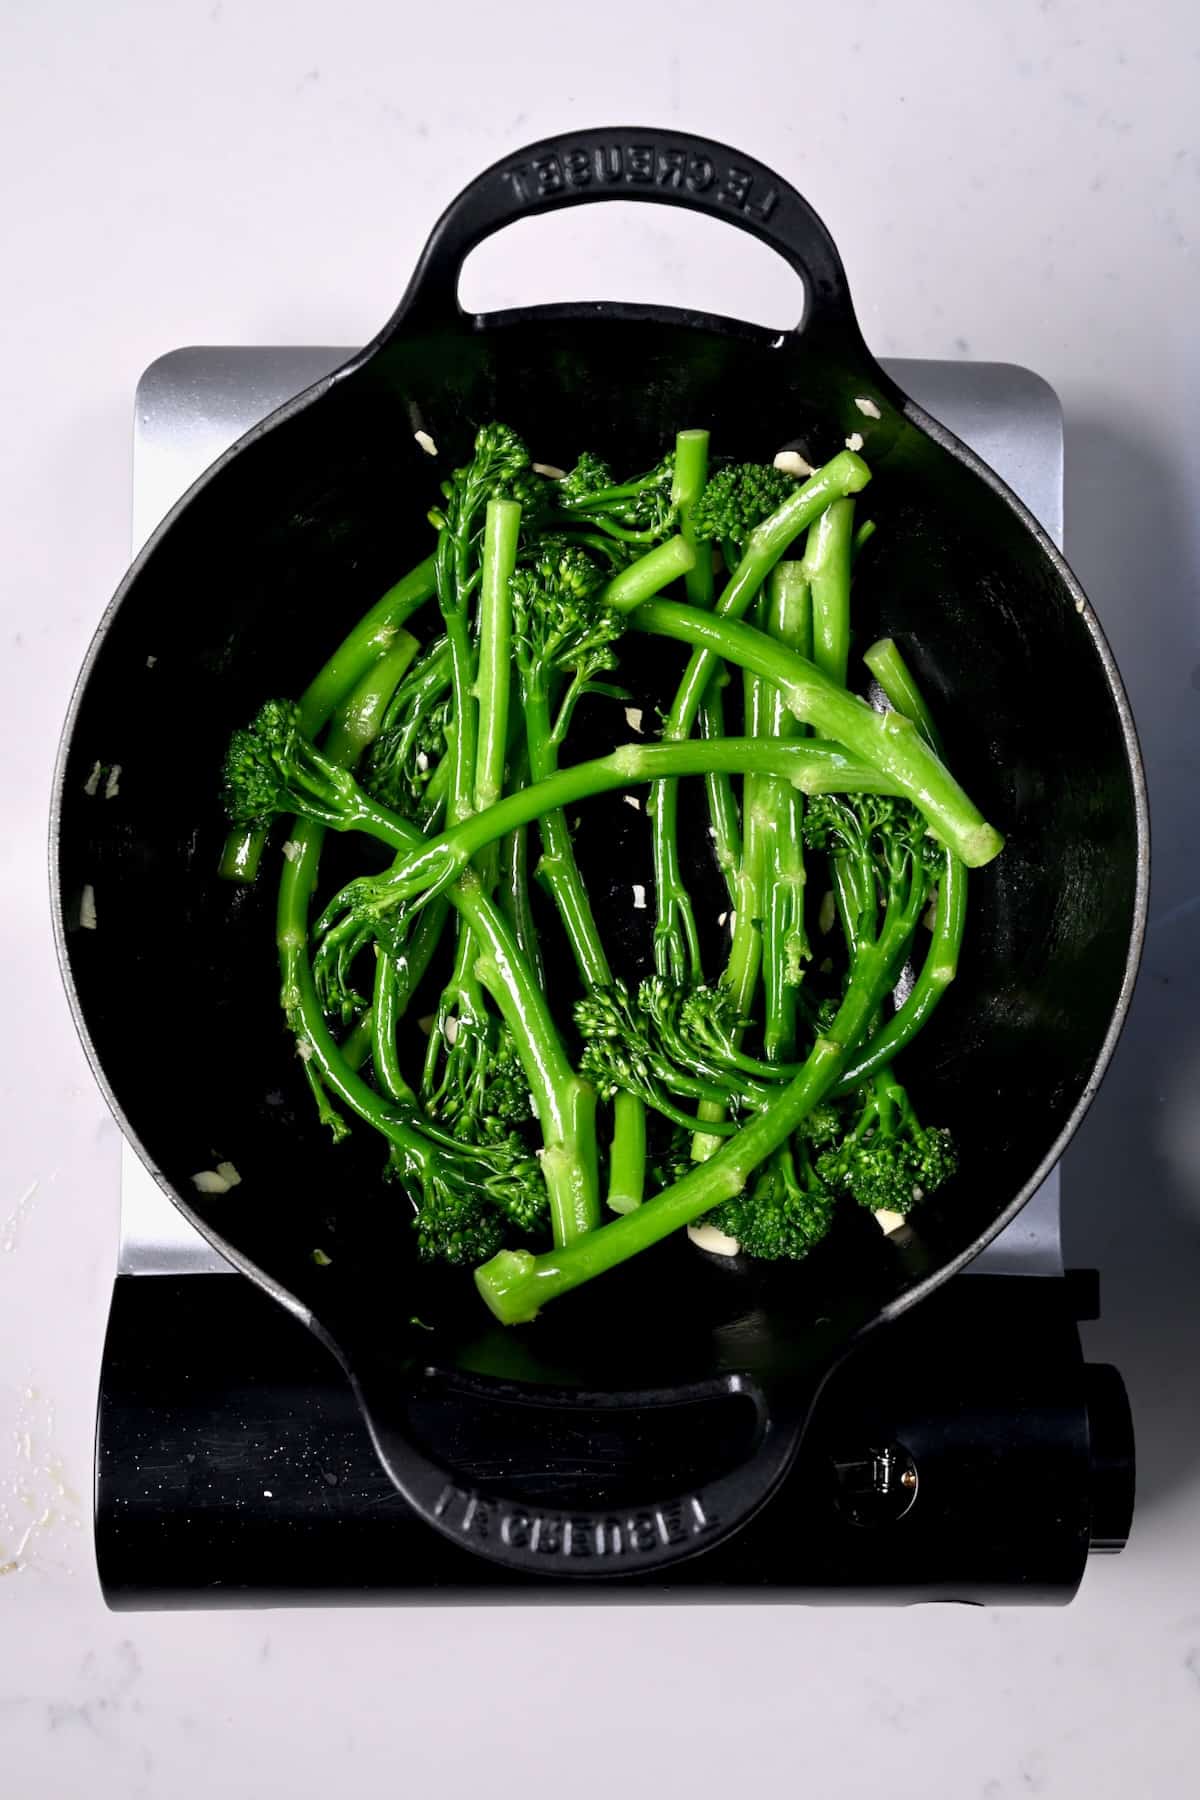 Sauteeing broccolini with some garlic